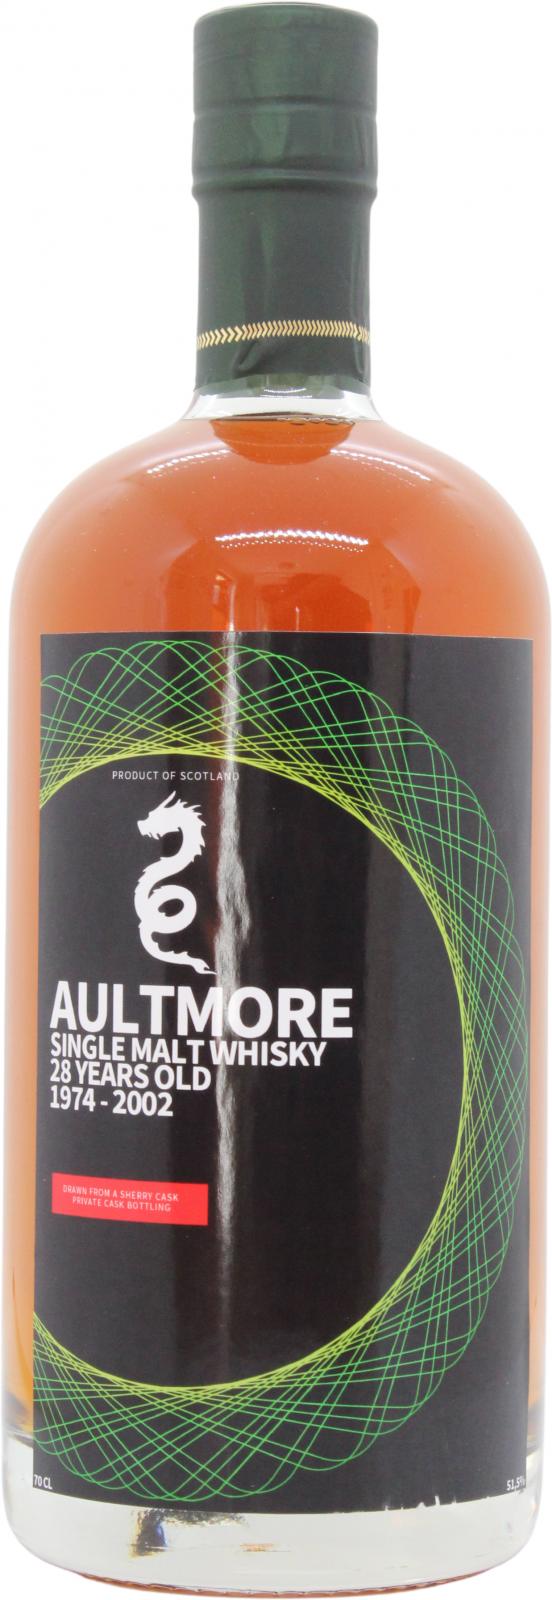 Aultmore 1974 UD Sherry Cask Private Bottling 51.5% 700ml